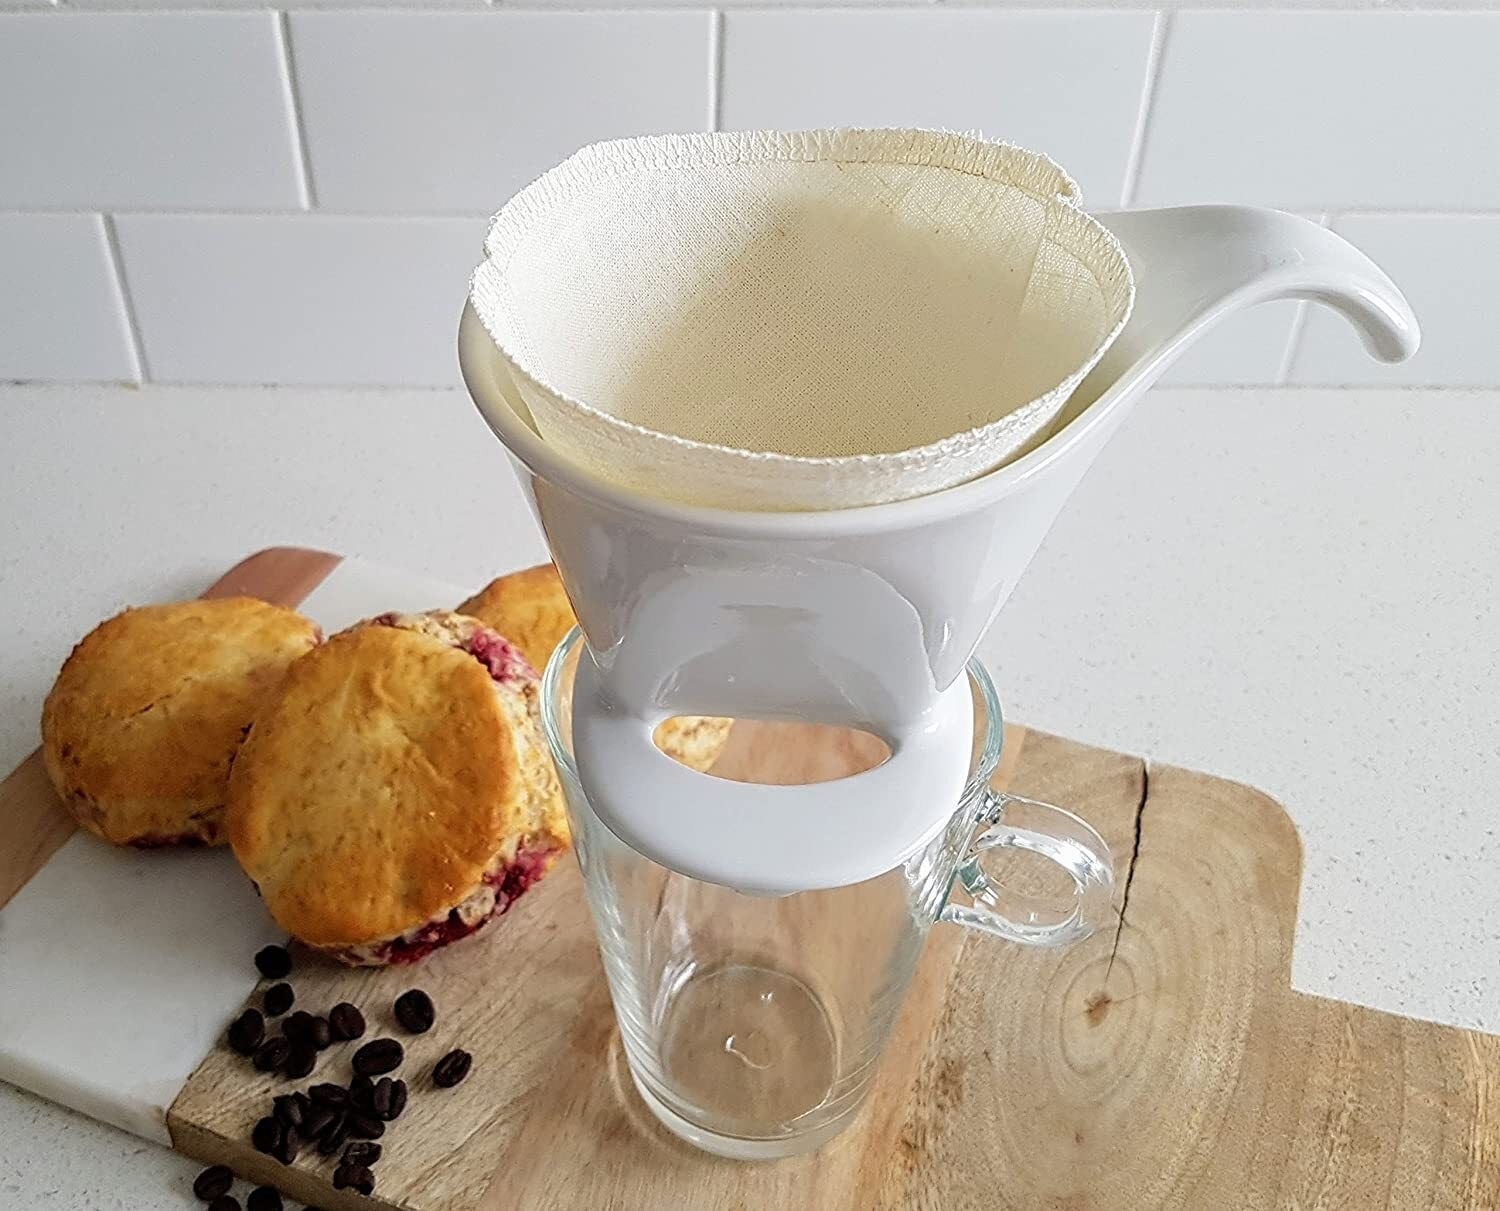 A coffee filter in an over pour coffee maker that&#x27;s placed on top of a glass mug